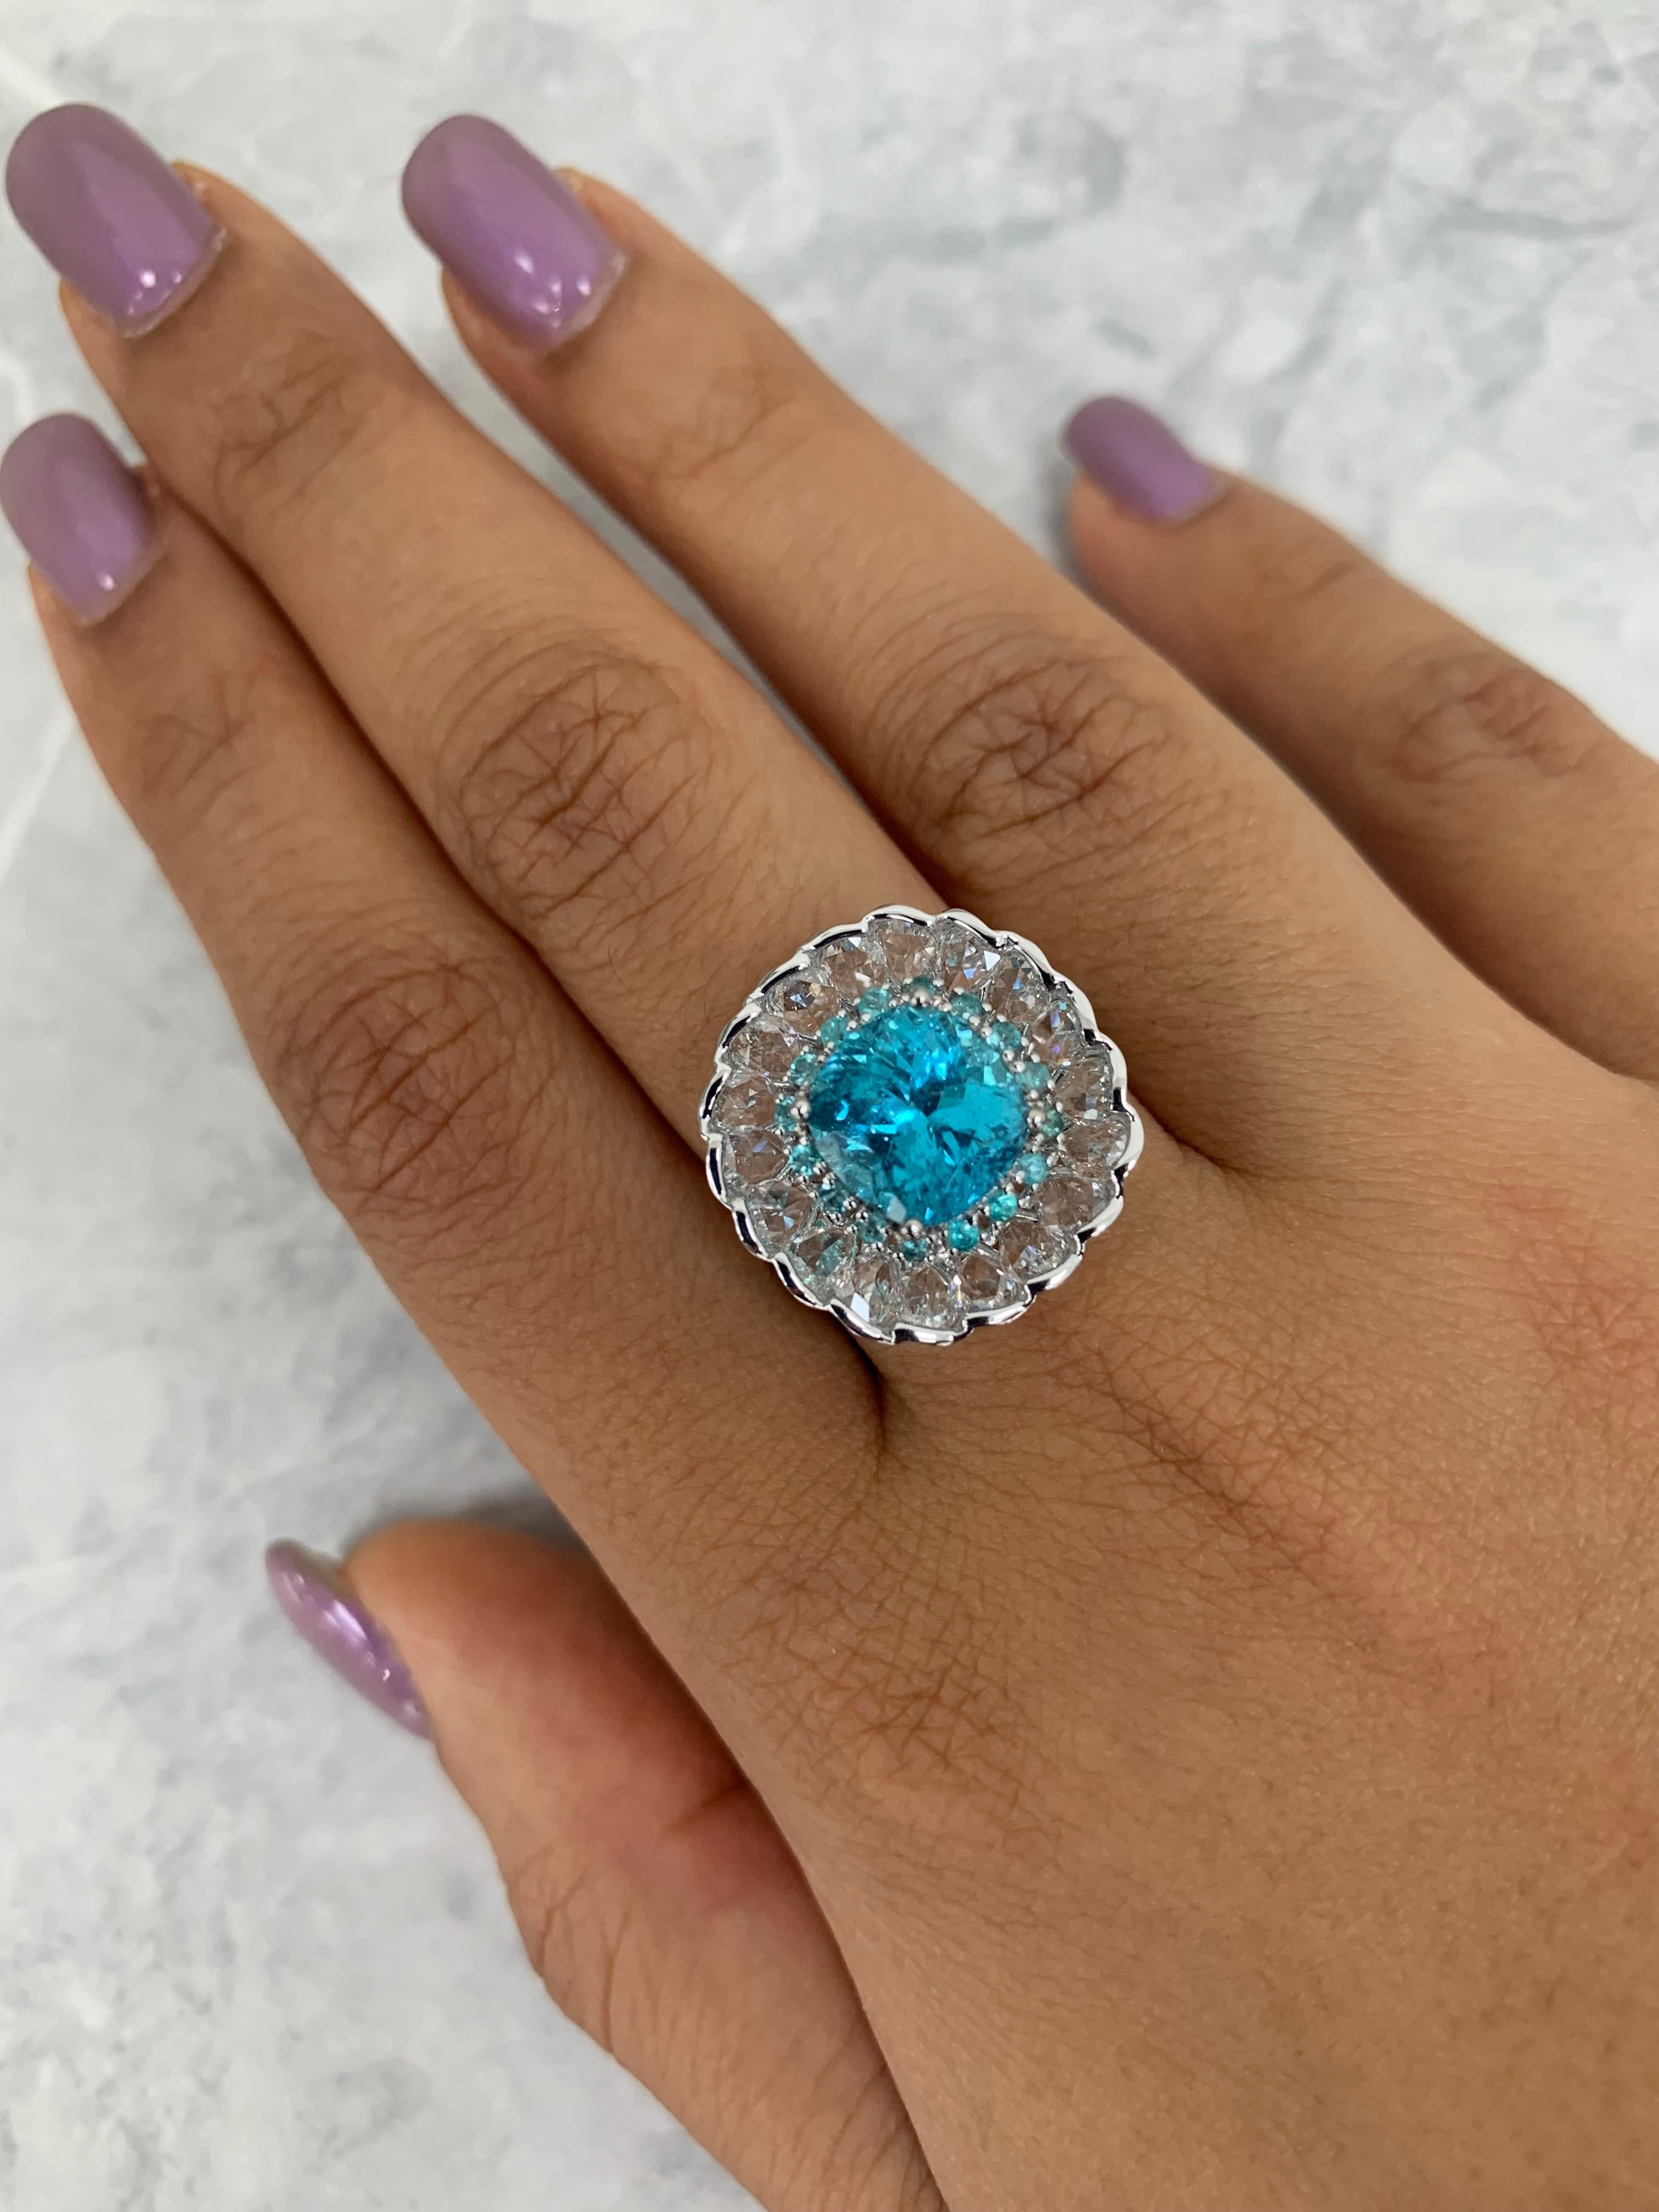 Sunita Nahata GRS Mozambique Paraiba 3.07Ct Ring in 18KWG For Sale 1